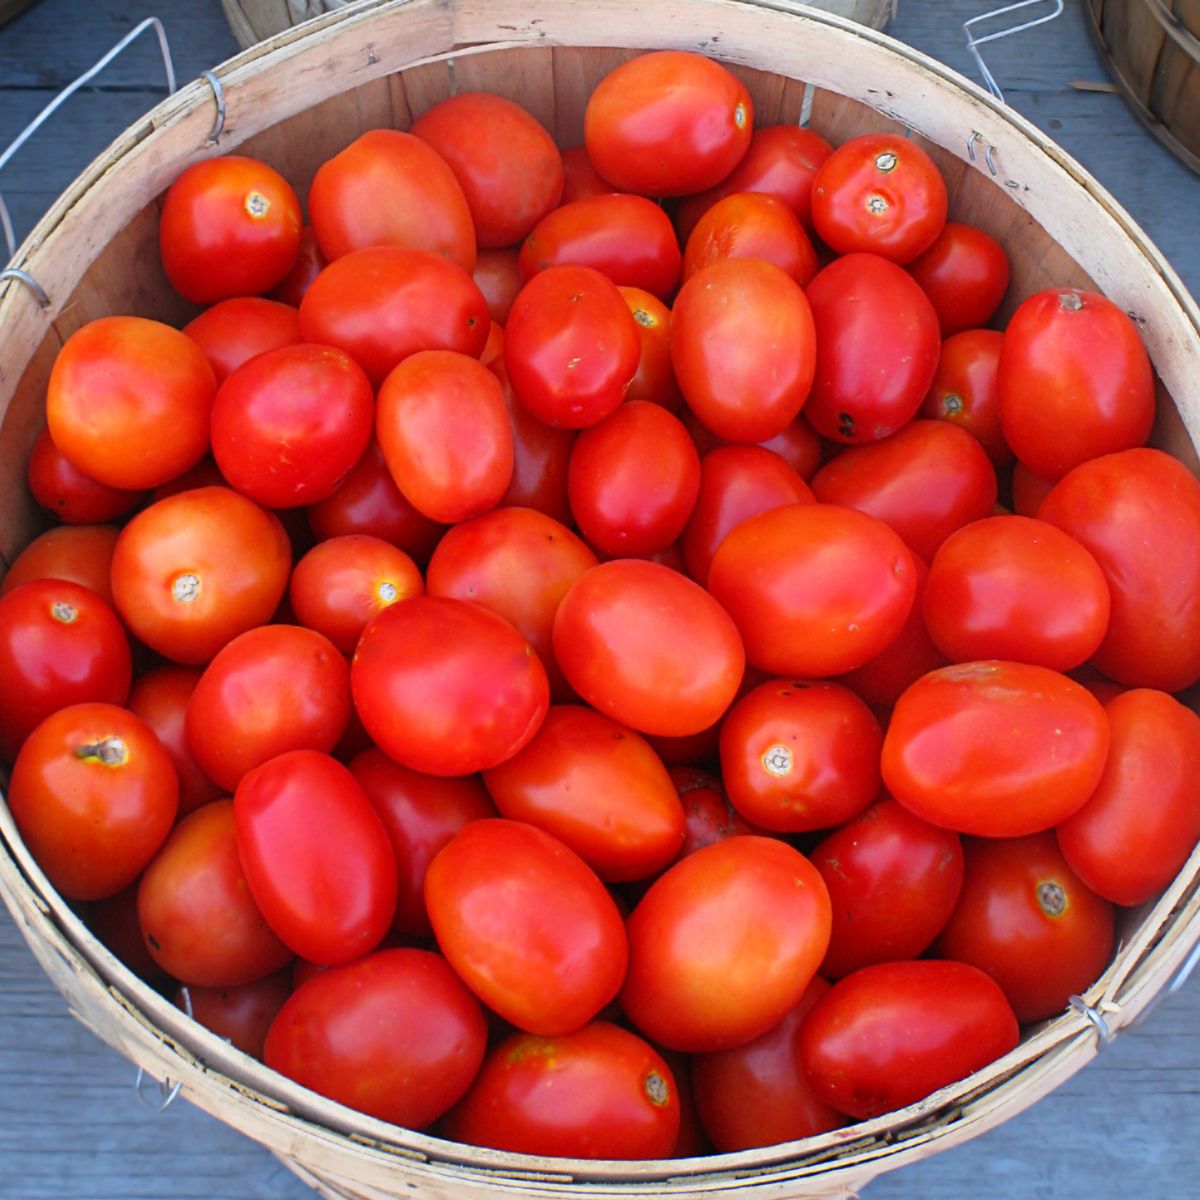 This is Roma tomatoes in a basket.